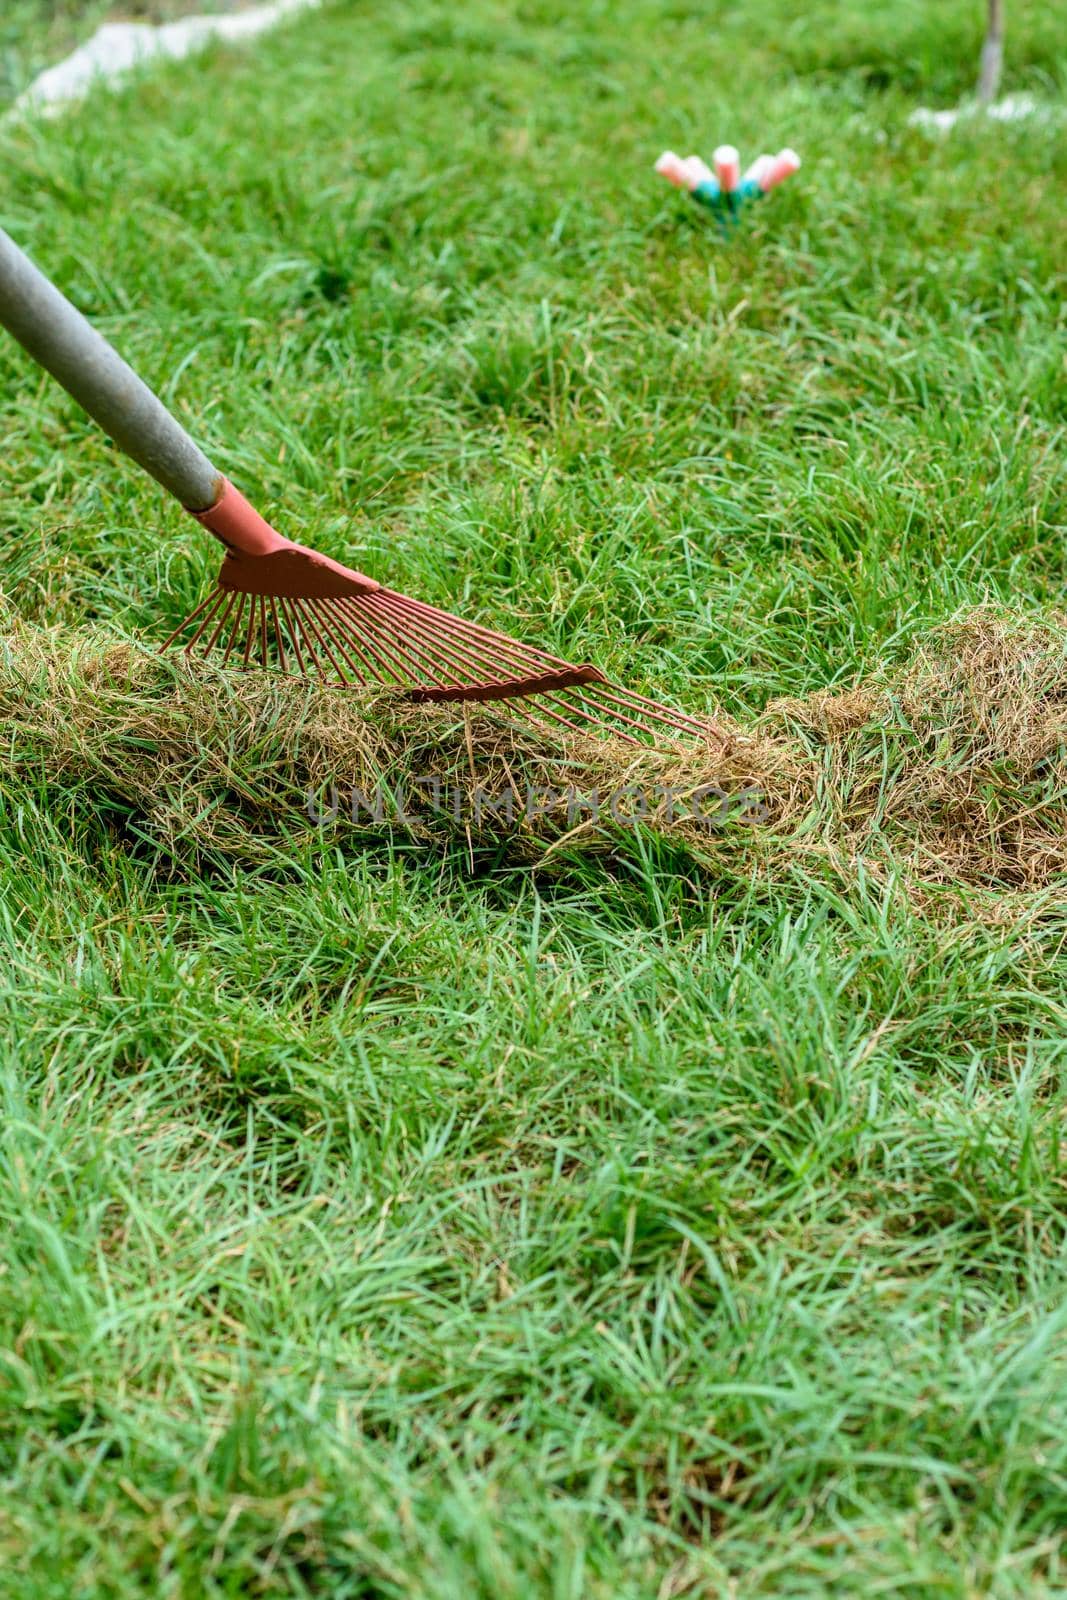 Hand-picking of cut grass with a fan rake by Madhourse